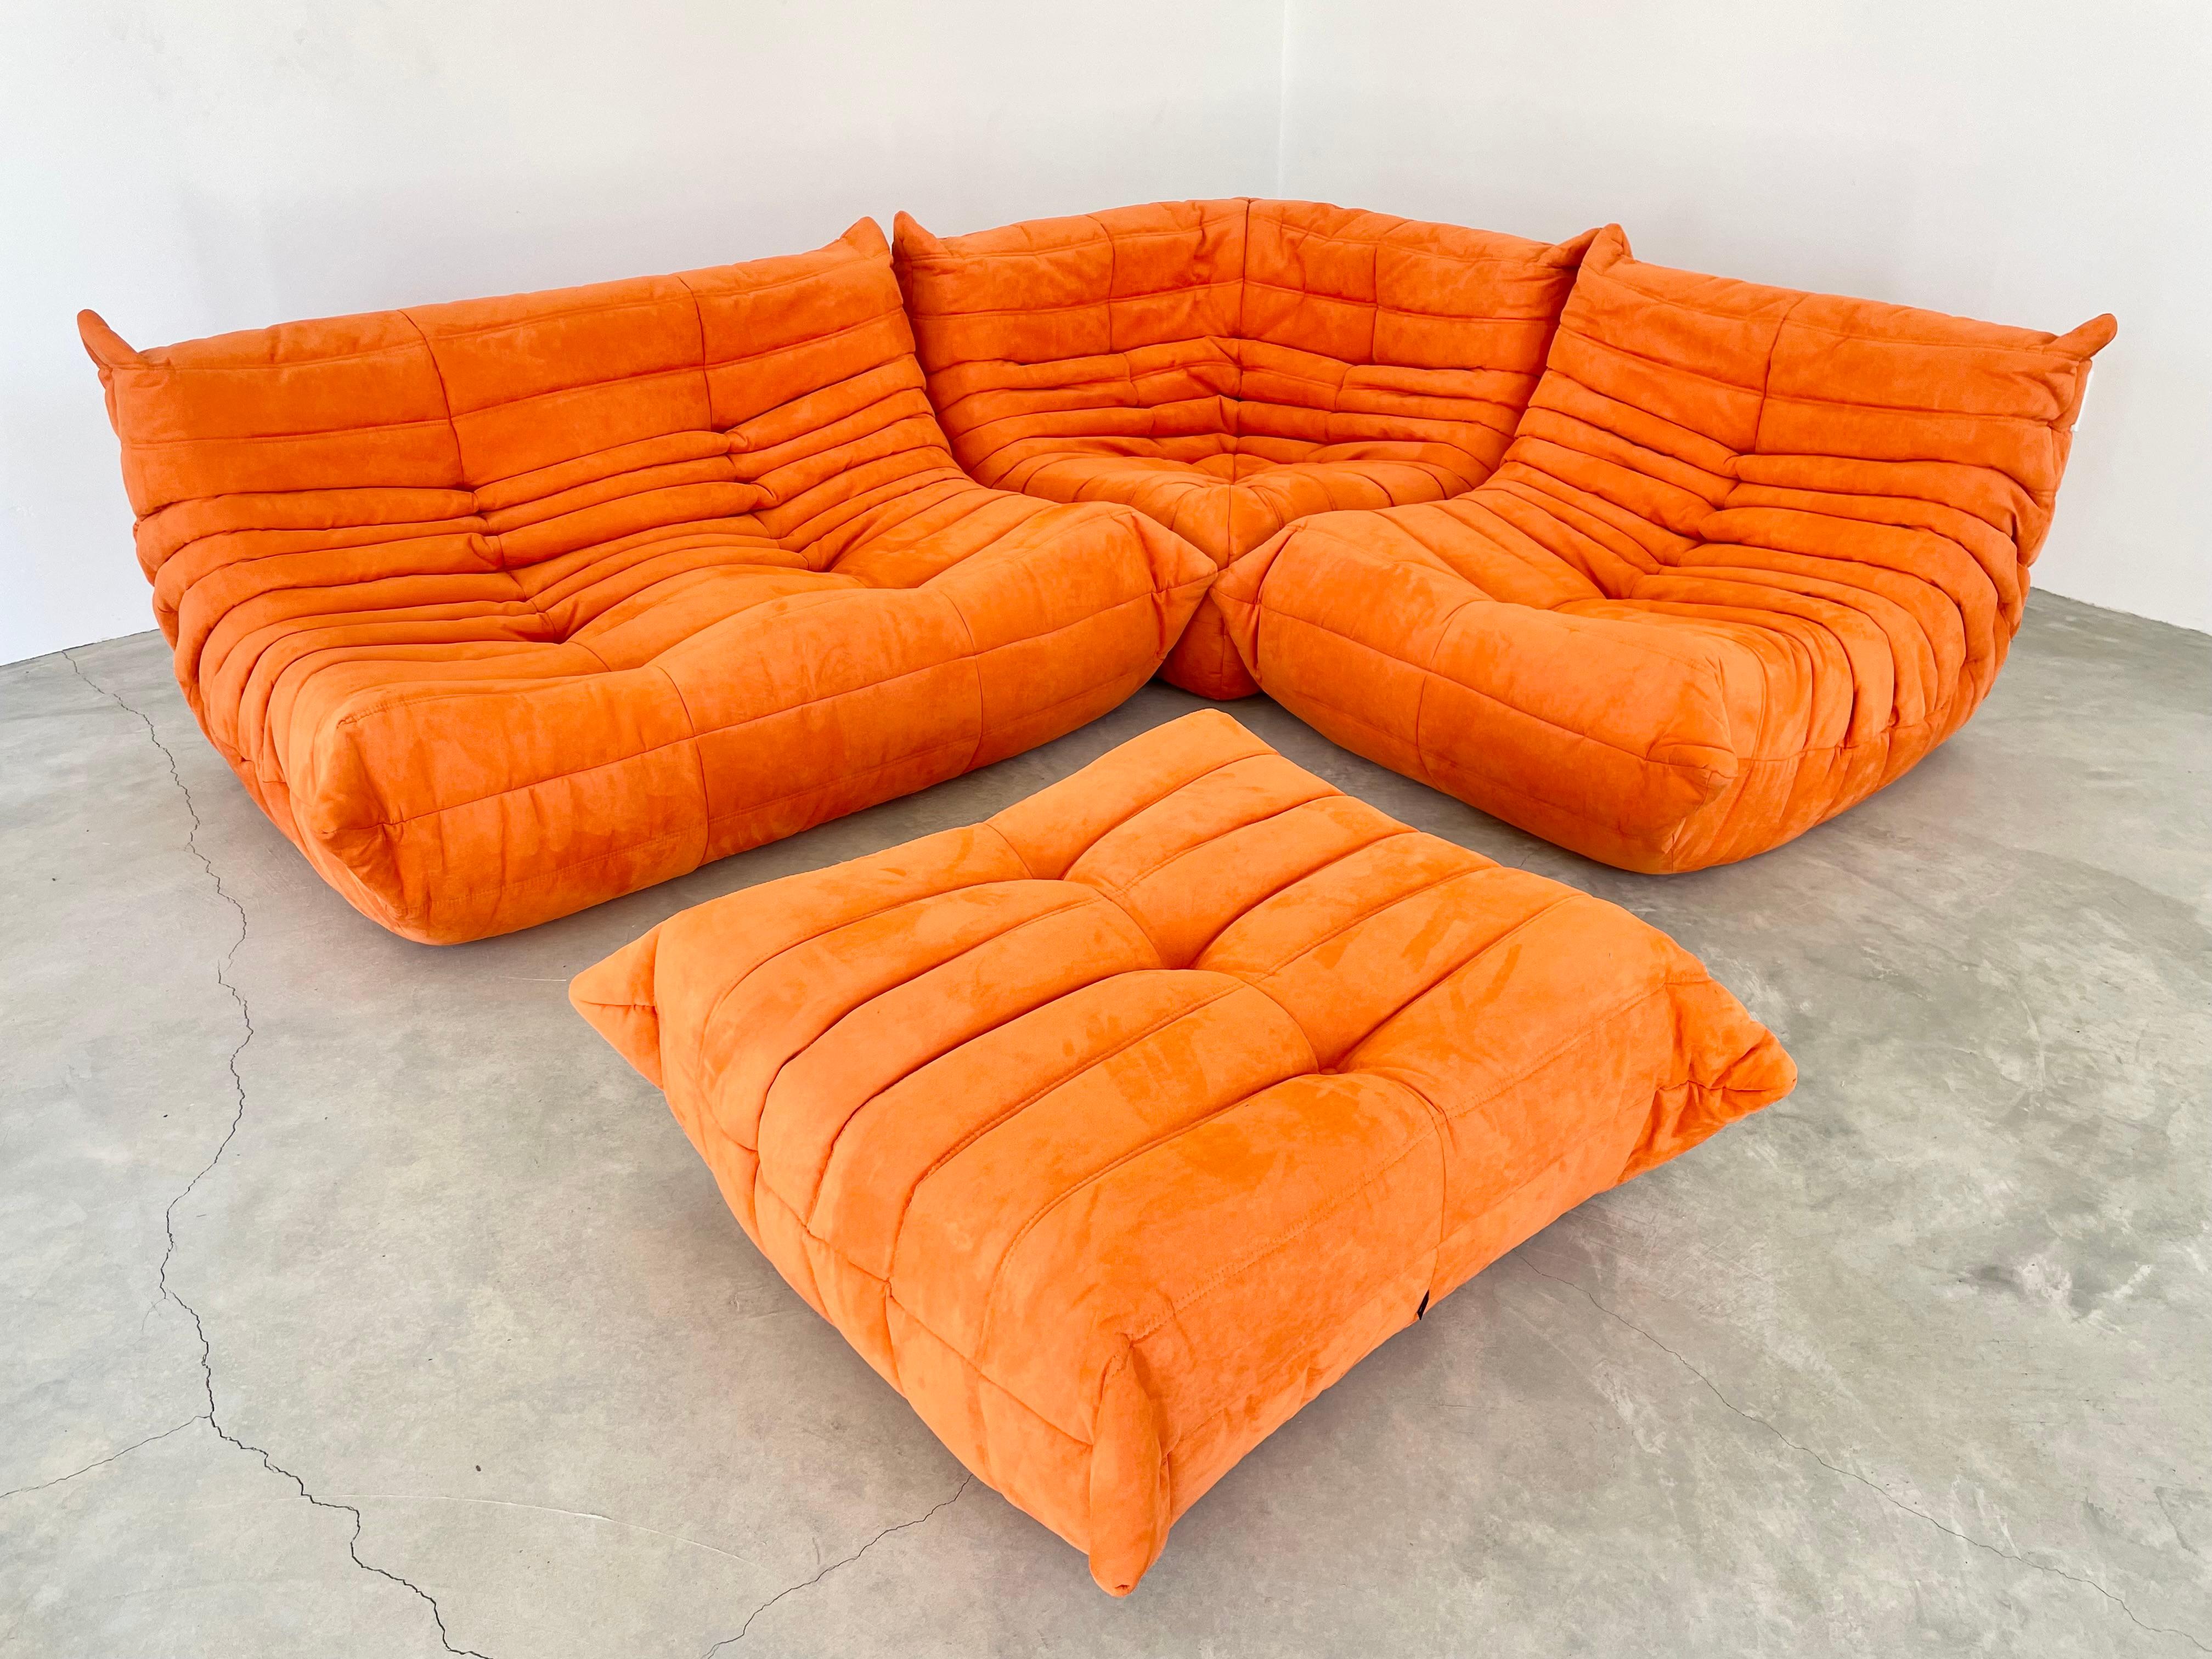 Classic French Togo set by Michel Ducaroy for luxury brand Ligne Roset. Originally designed in the 1970s the iconic togo sofa is now a design classic. This set comes in its original orange microsuede.

Timeless comfort and style make this four